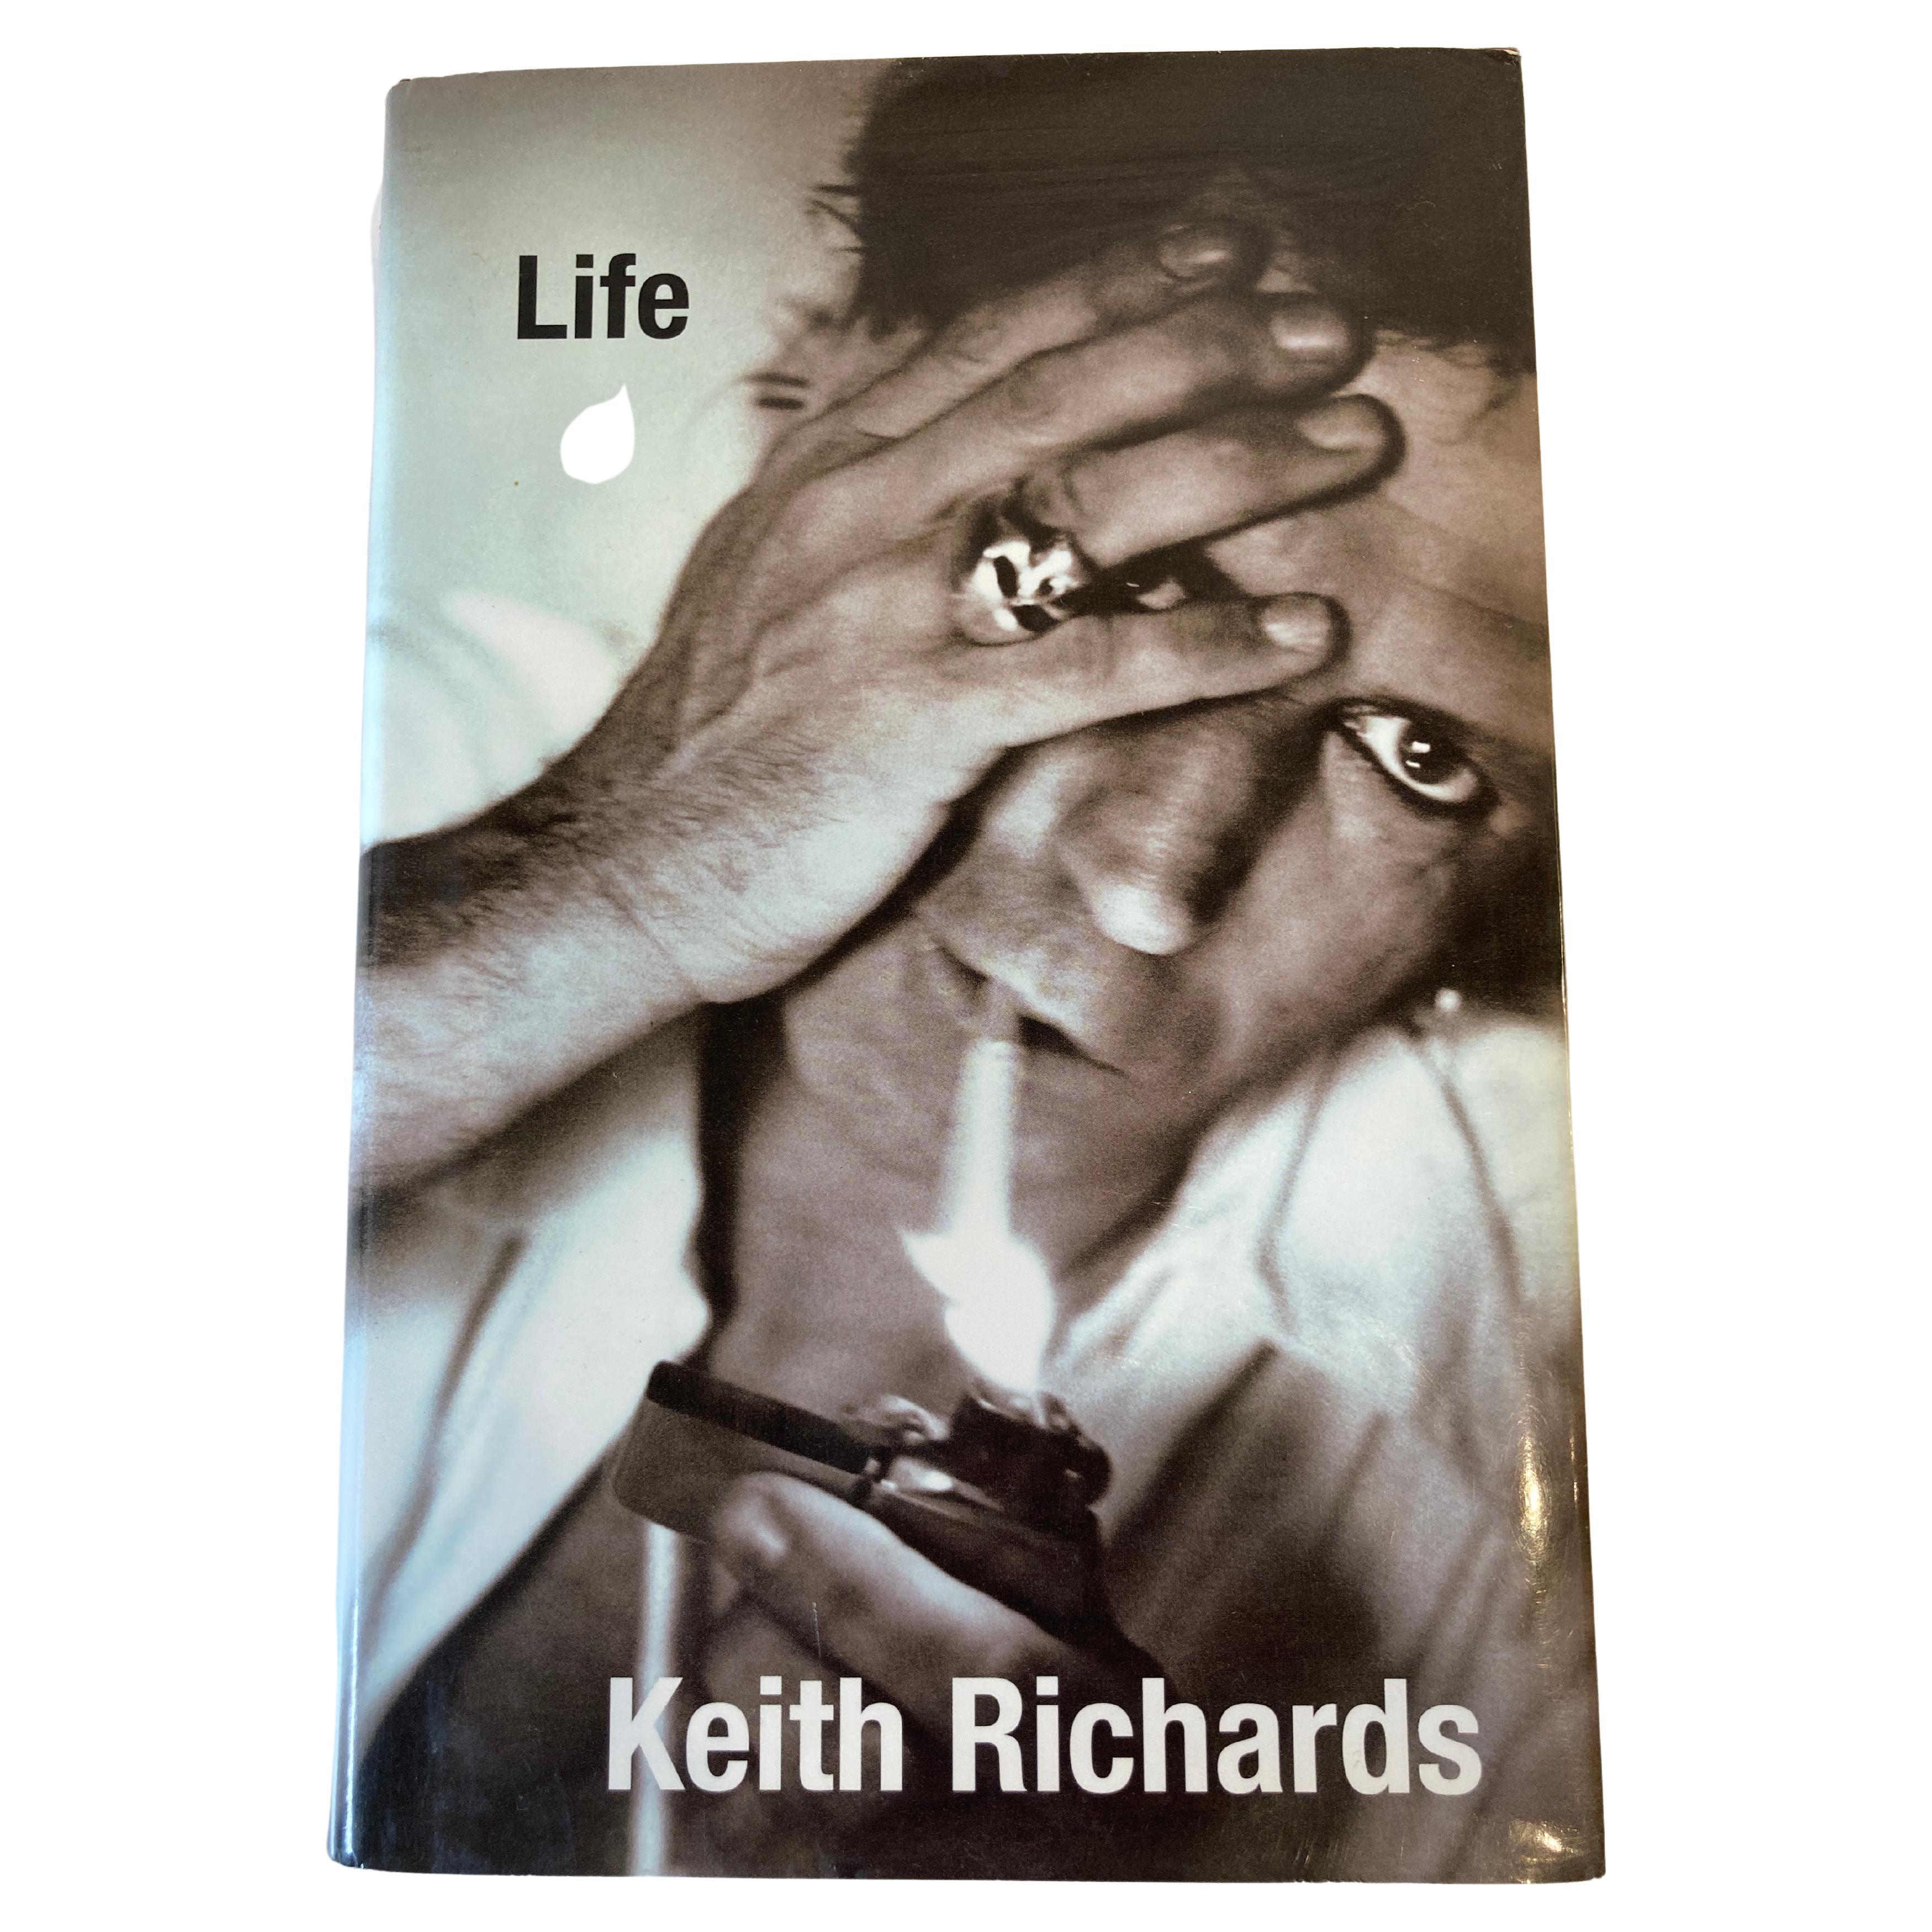 Life by Keith Richards, 1st Edition 2010 Hardcover Book